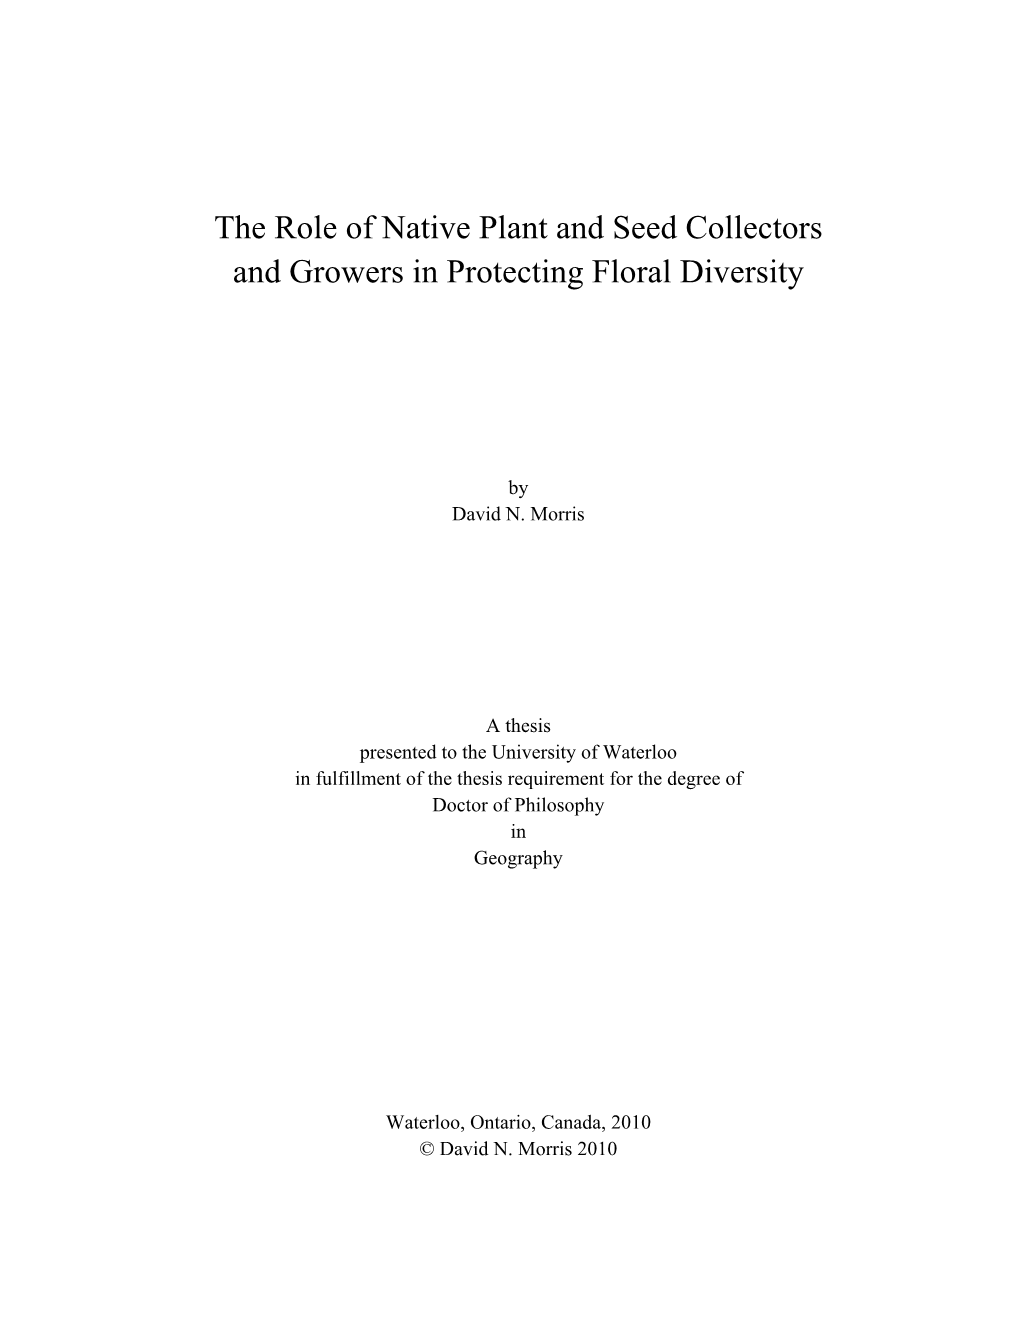 The Role of Native Plant and Seed Collectors and Growers in Protecting Floral Diversity